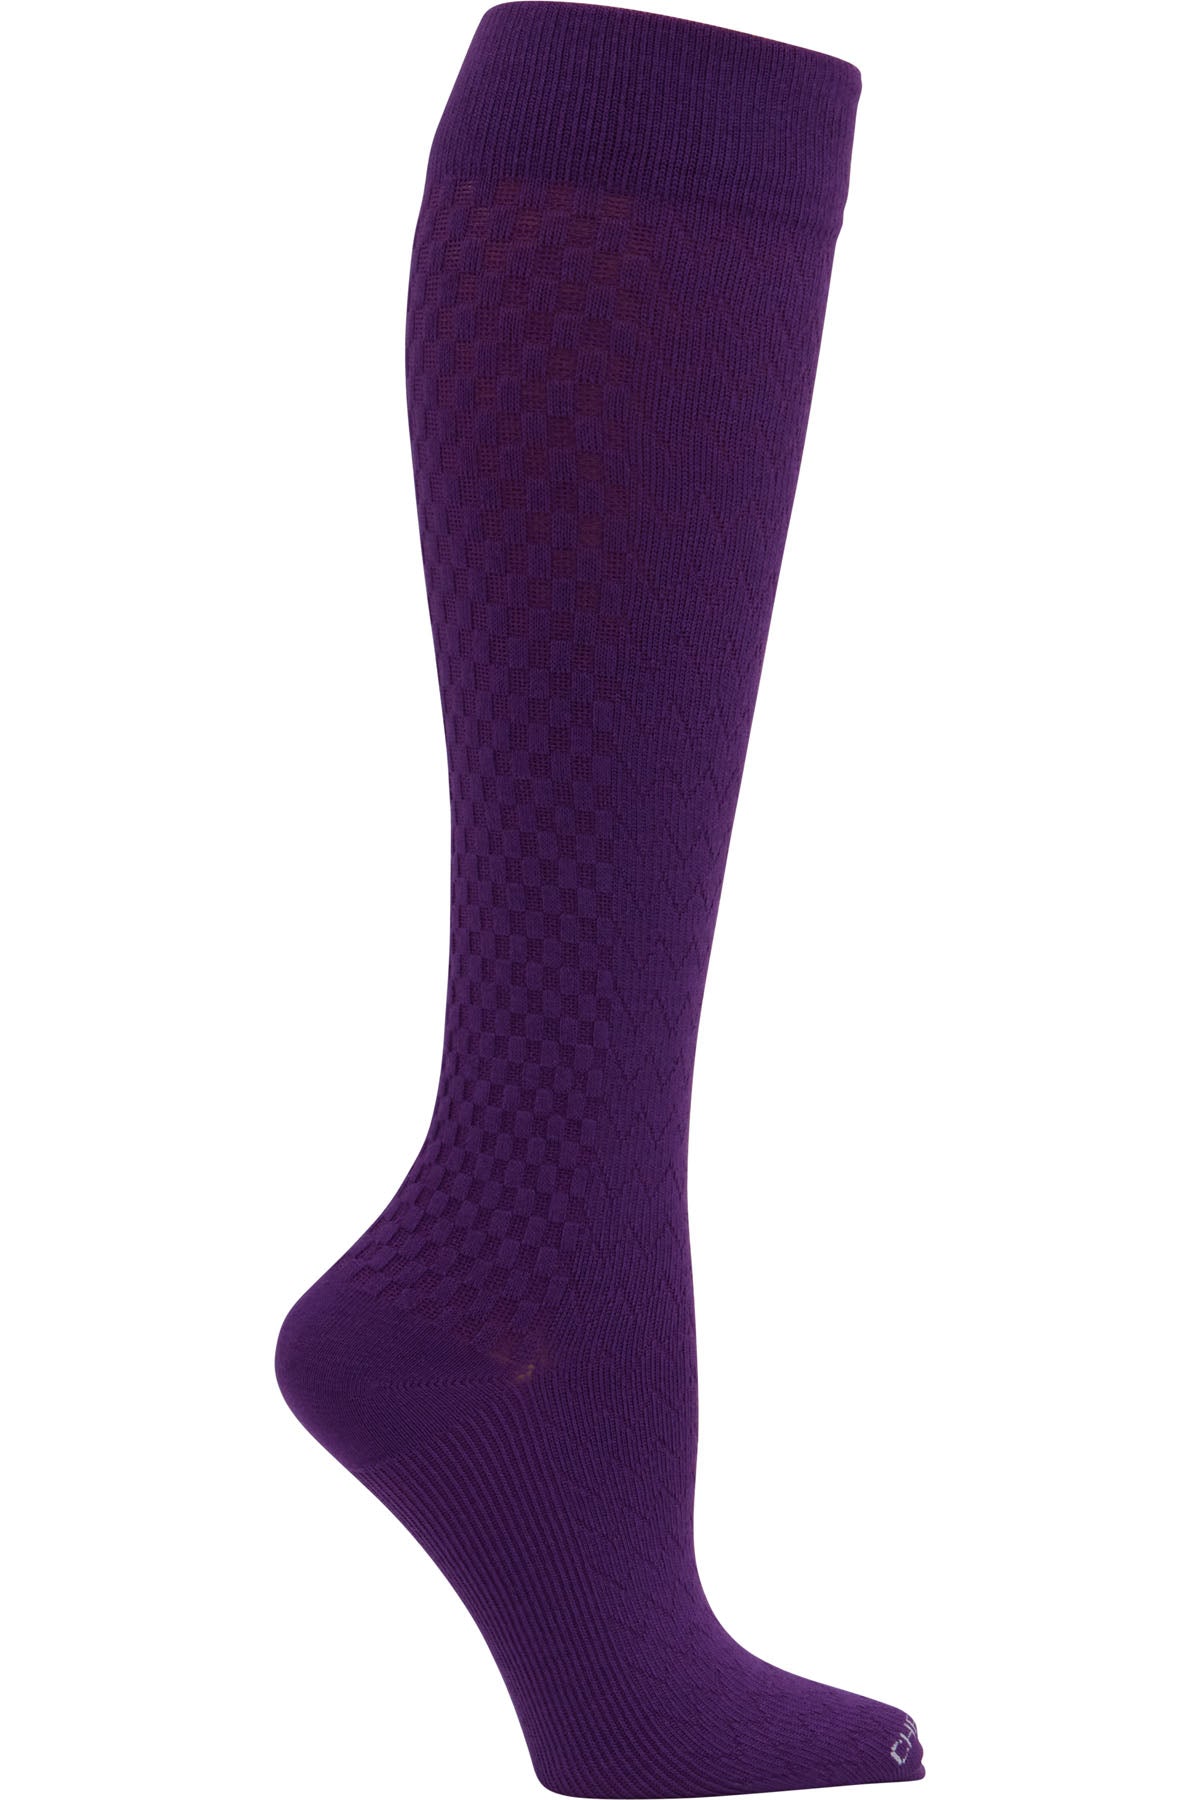 Cherokee Mild Compression Socks True Support 10-15 mmHg in Wisteria at Parker's Clothing and Shoes.